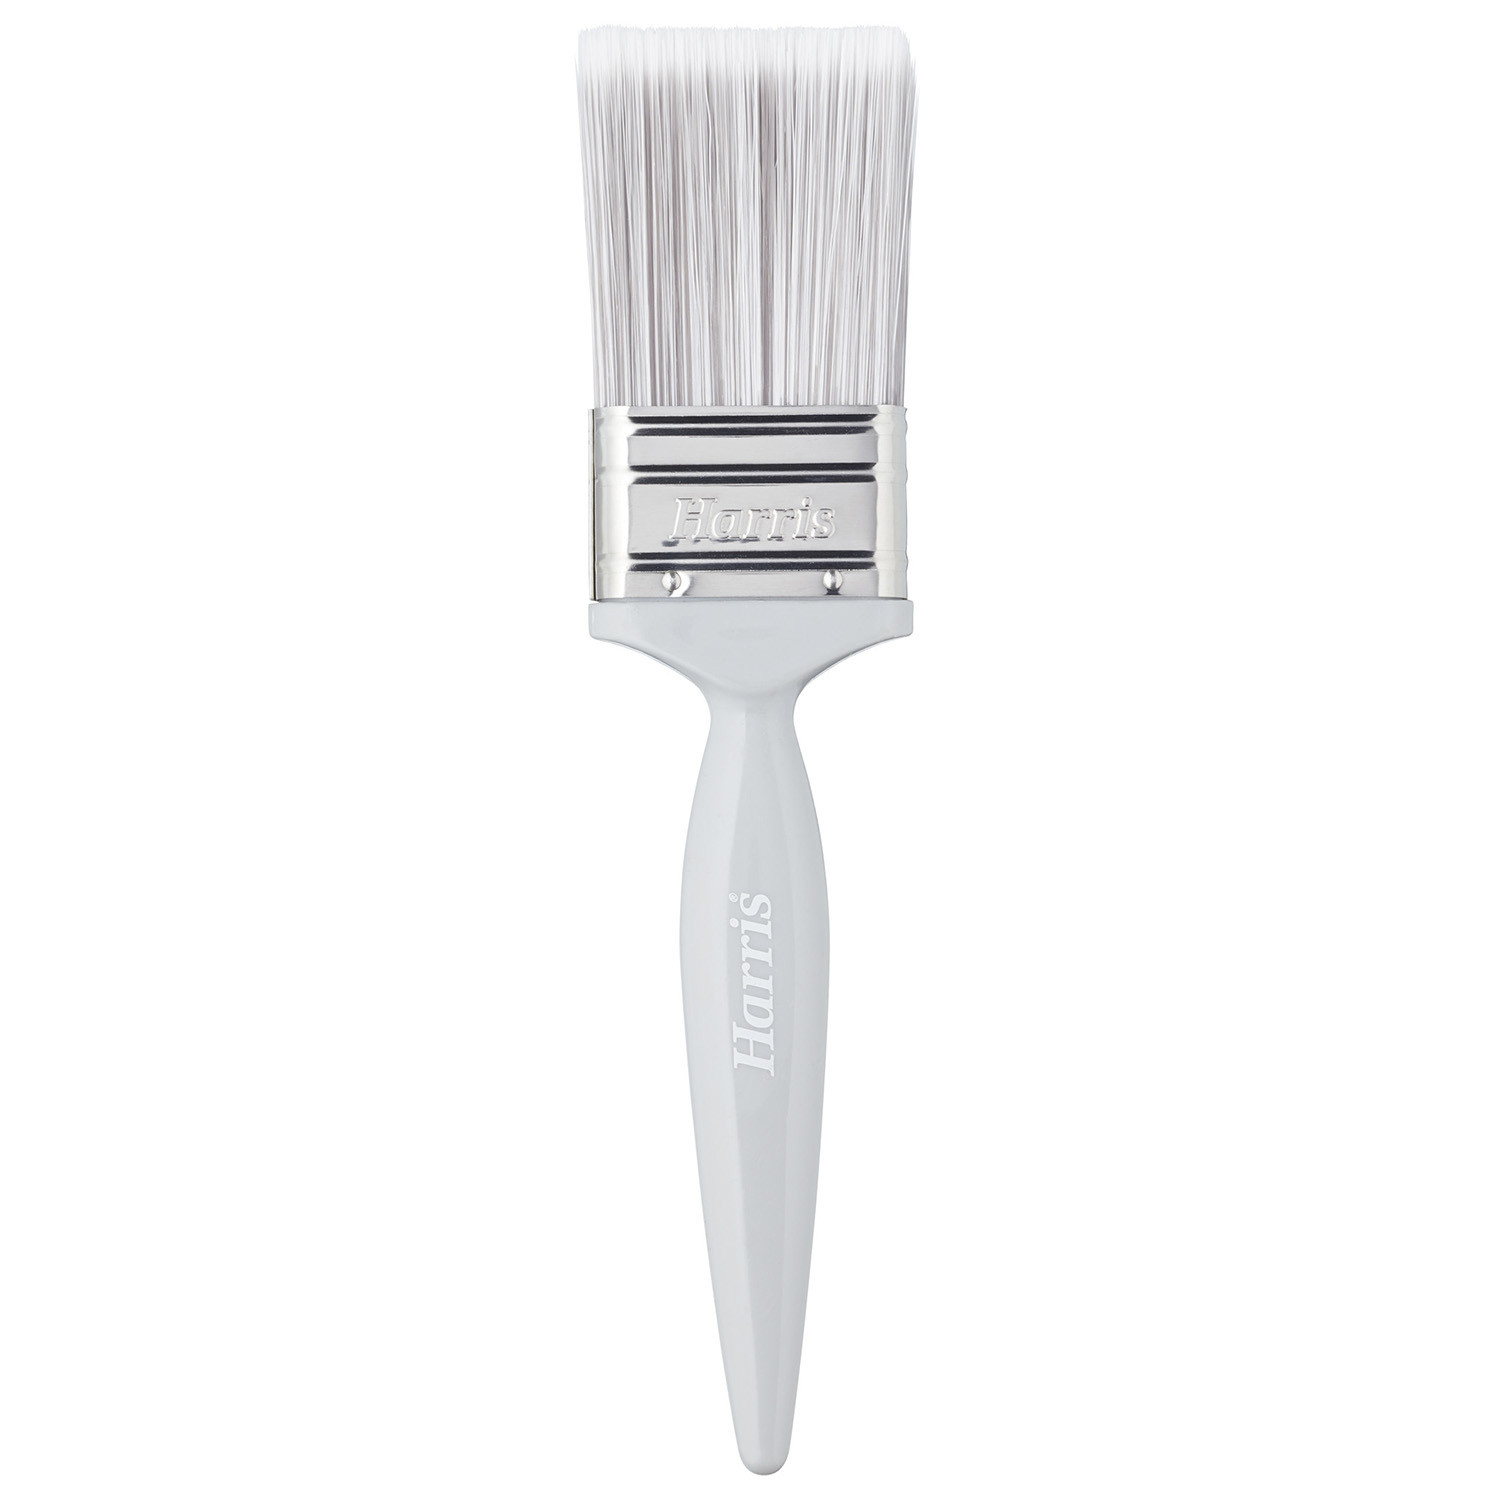 Harris 2 inch Essentials Walls and Ceilings Paint Brush Image 2